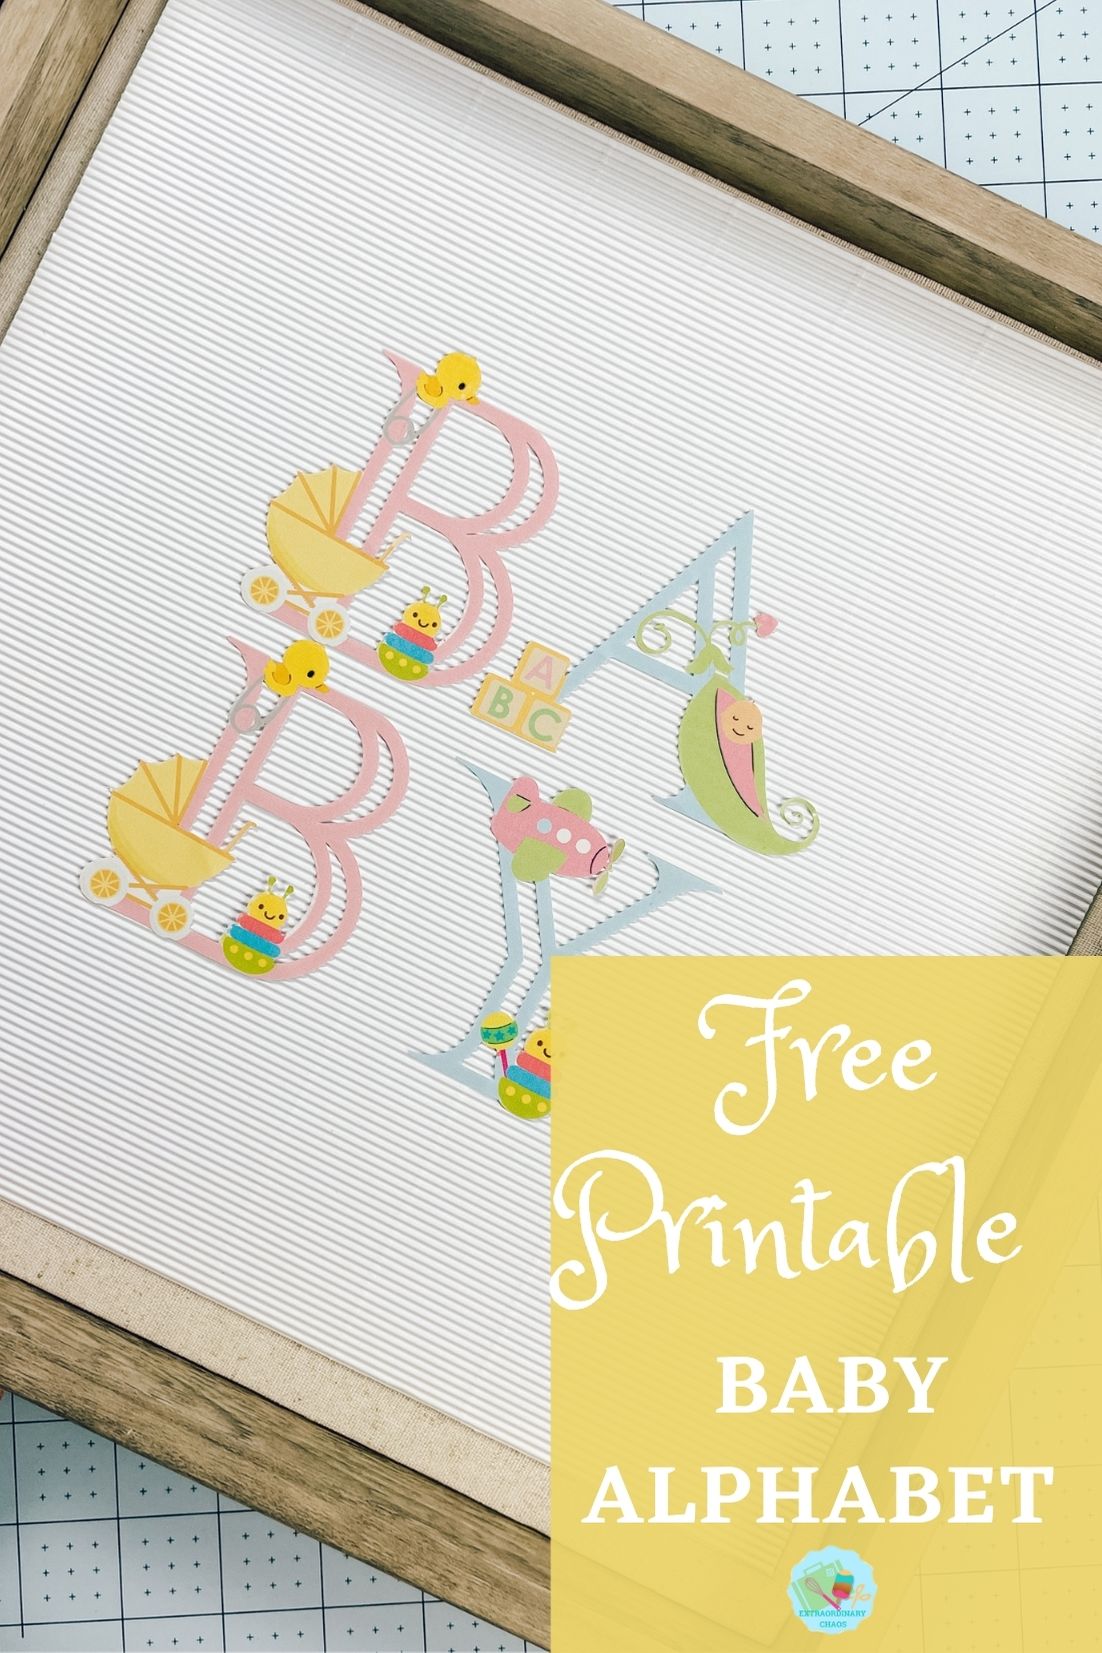 Baby printable alphabet for creating baby shower and baby gifts